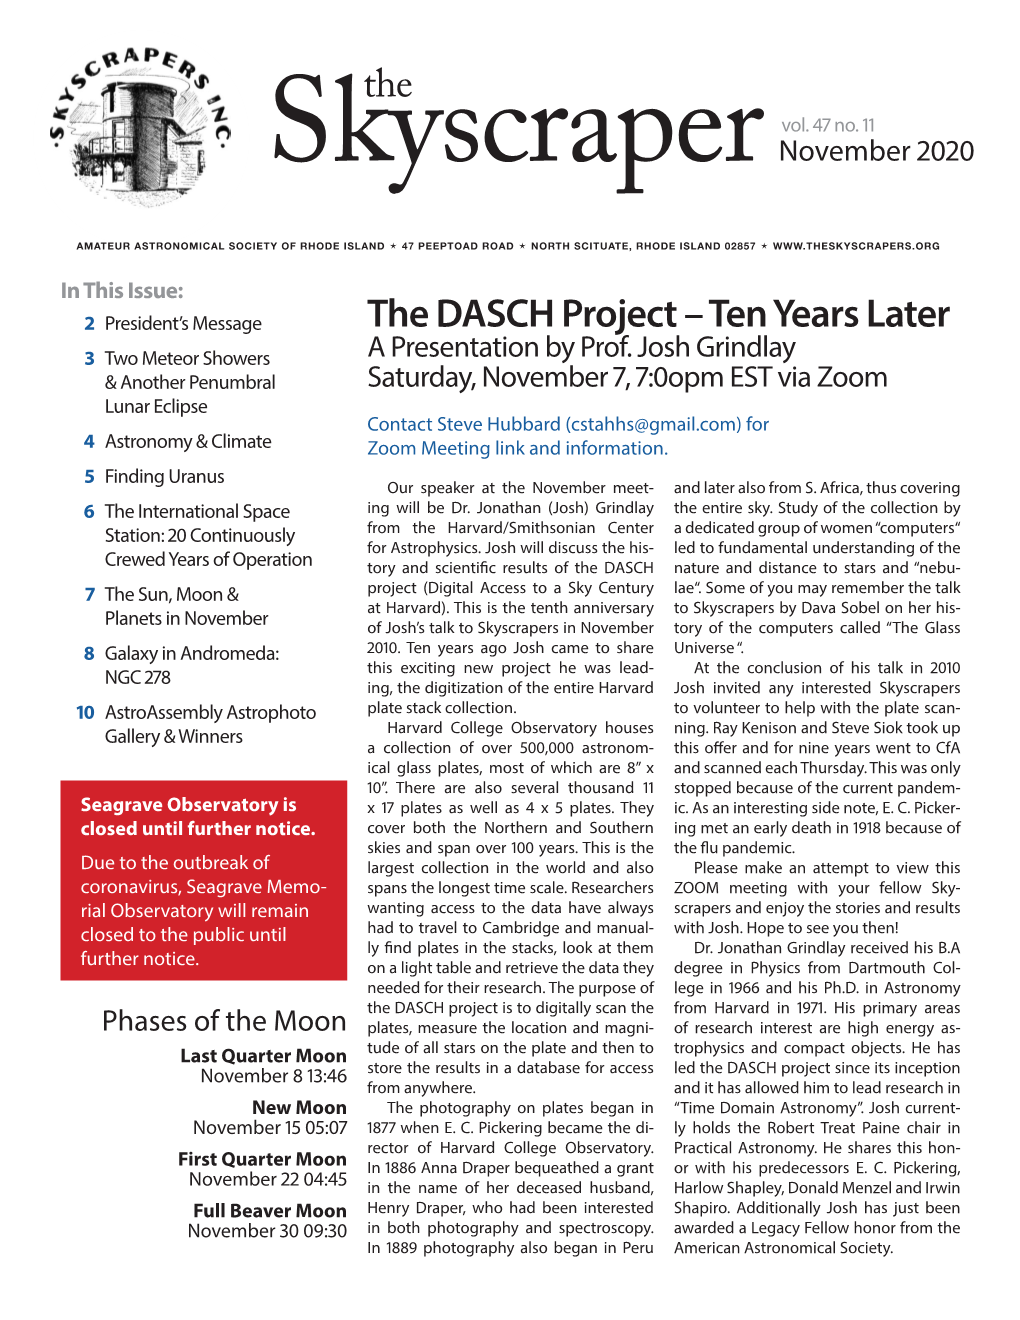 The the DASCH Project – Ten Years Later